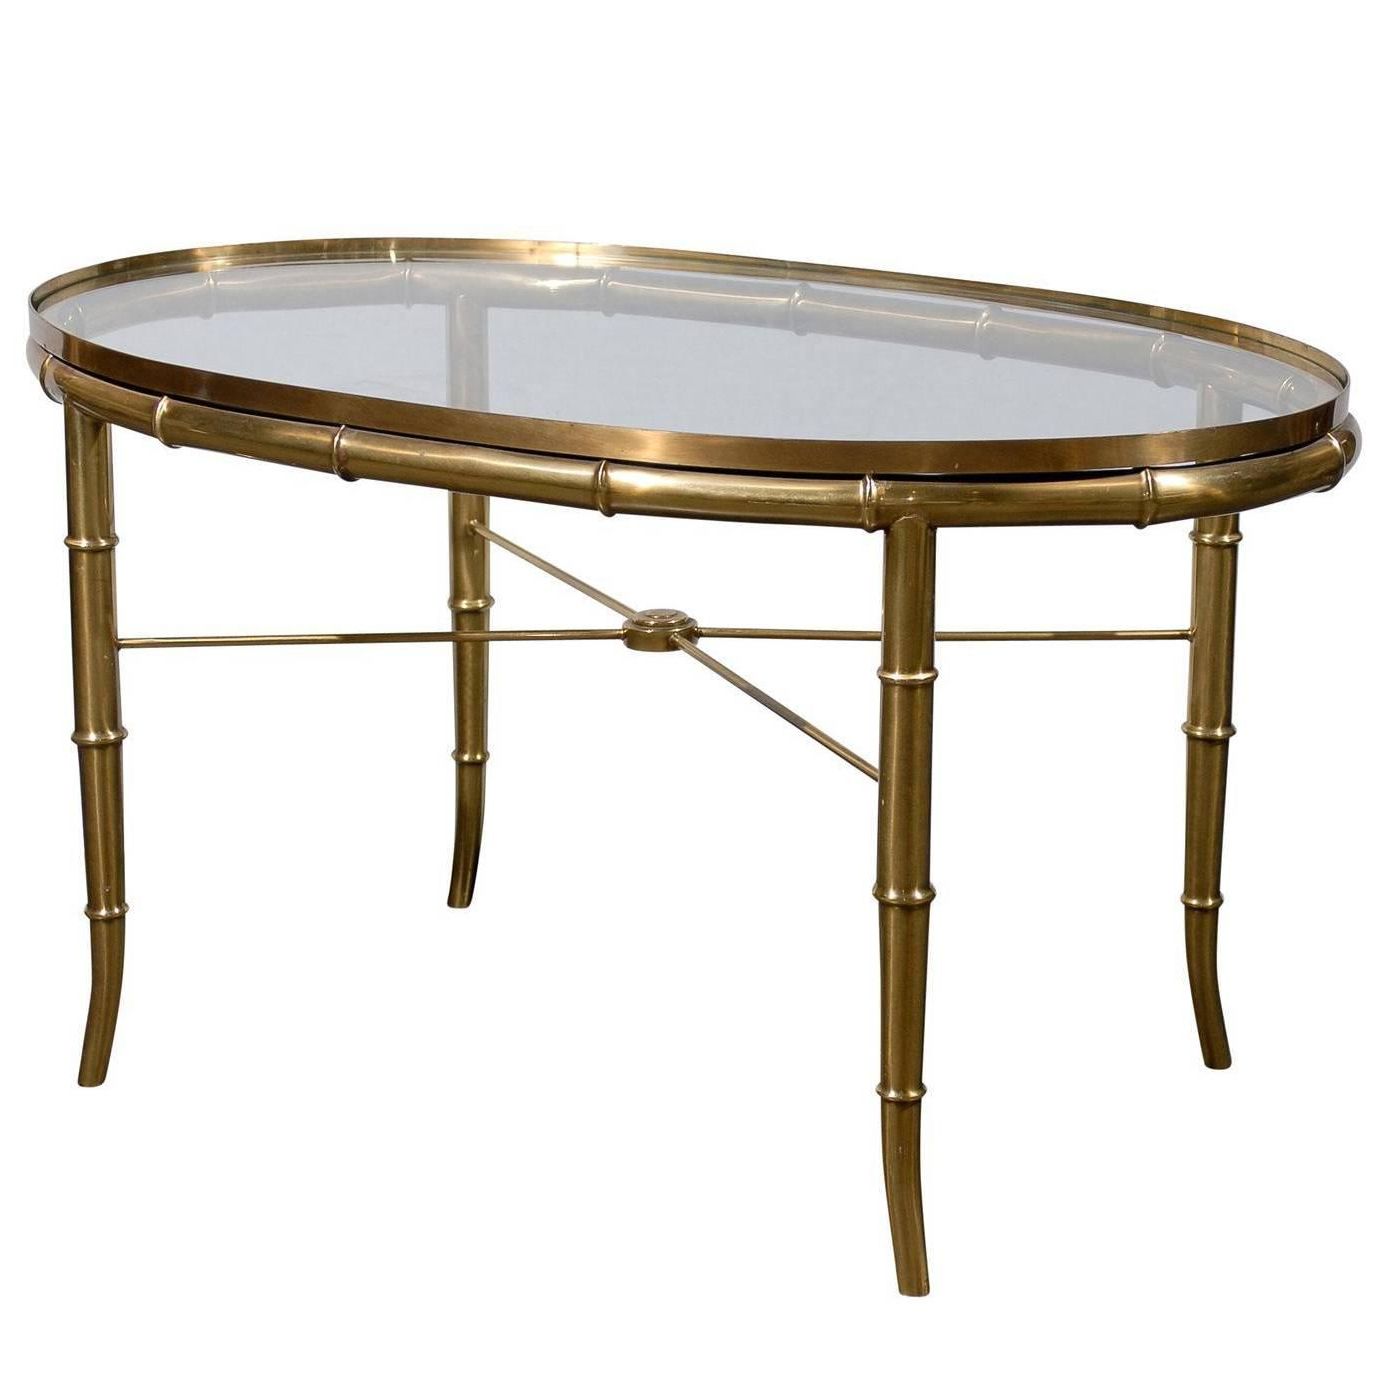 Oval Brass Glass Top Cocktail Or Coffee Table At 1stdibs In Fashionable Glass And Gold Oval Coffee Tables (Gallery 11 of 20)